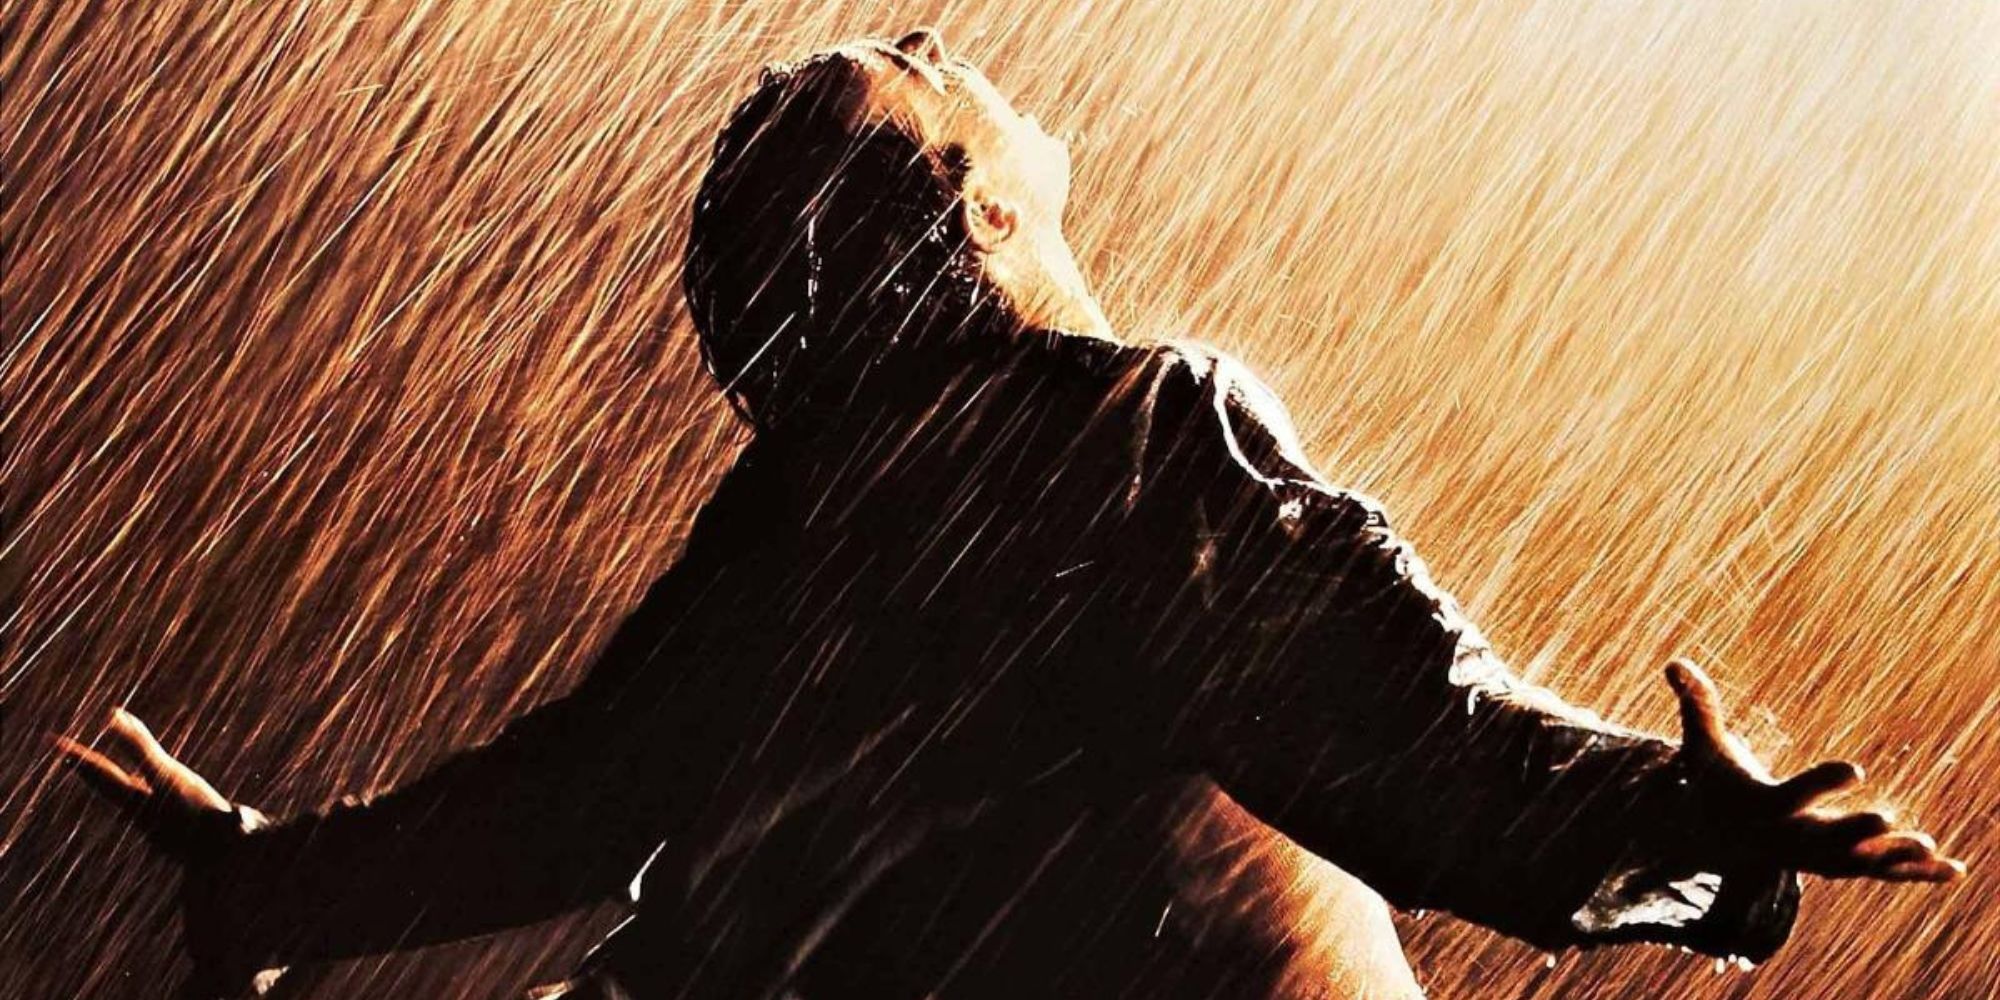 A man with his arms spread under the rain in The Shawshank Redemption poster